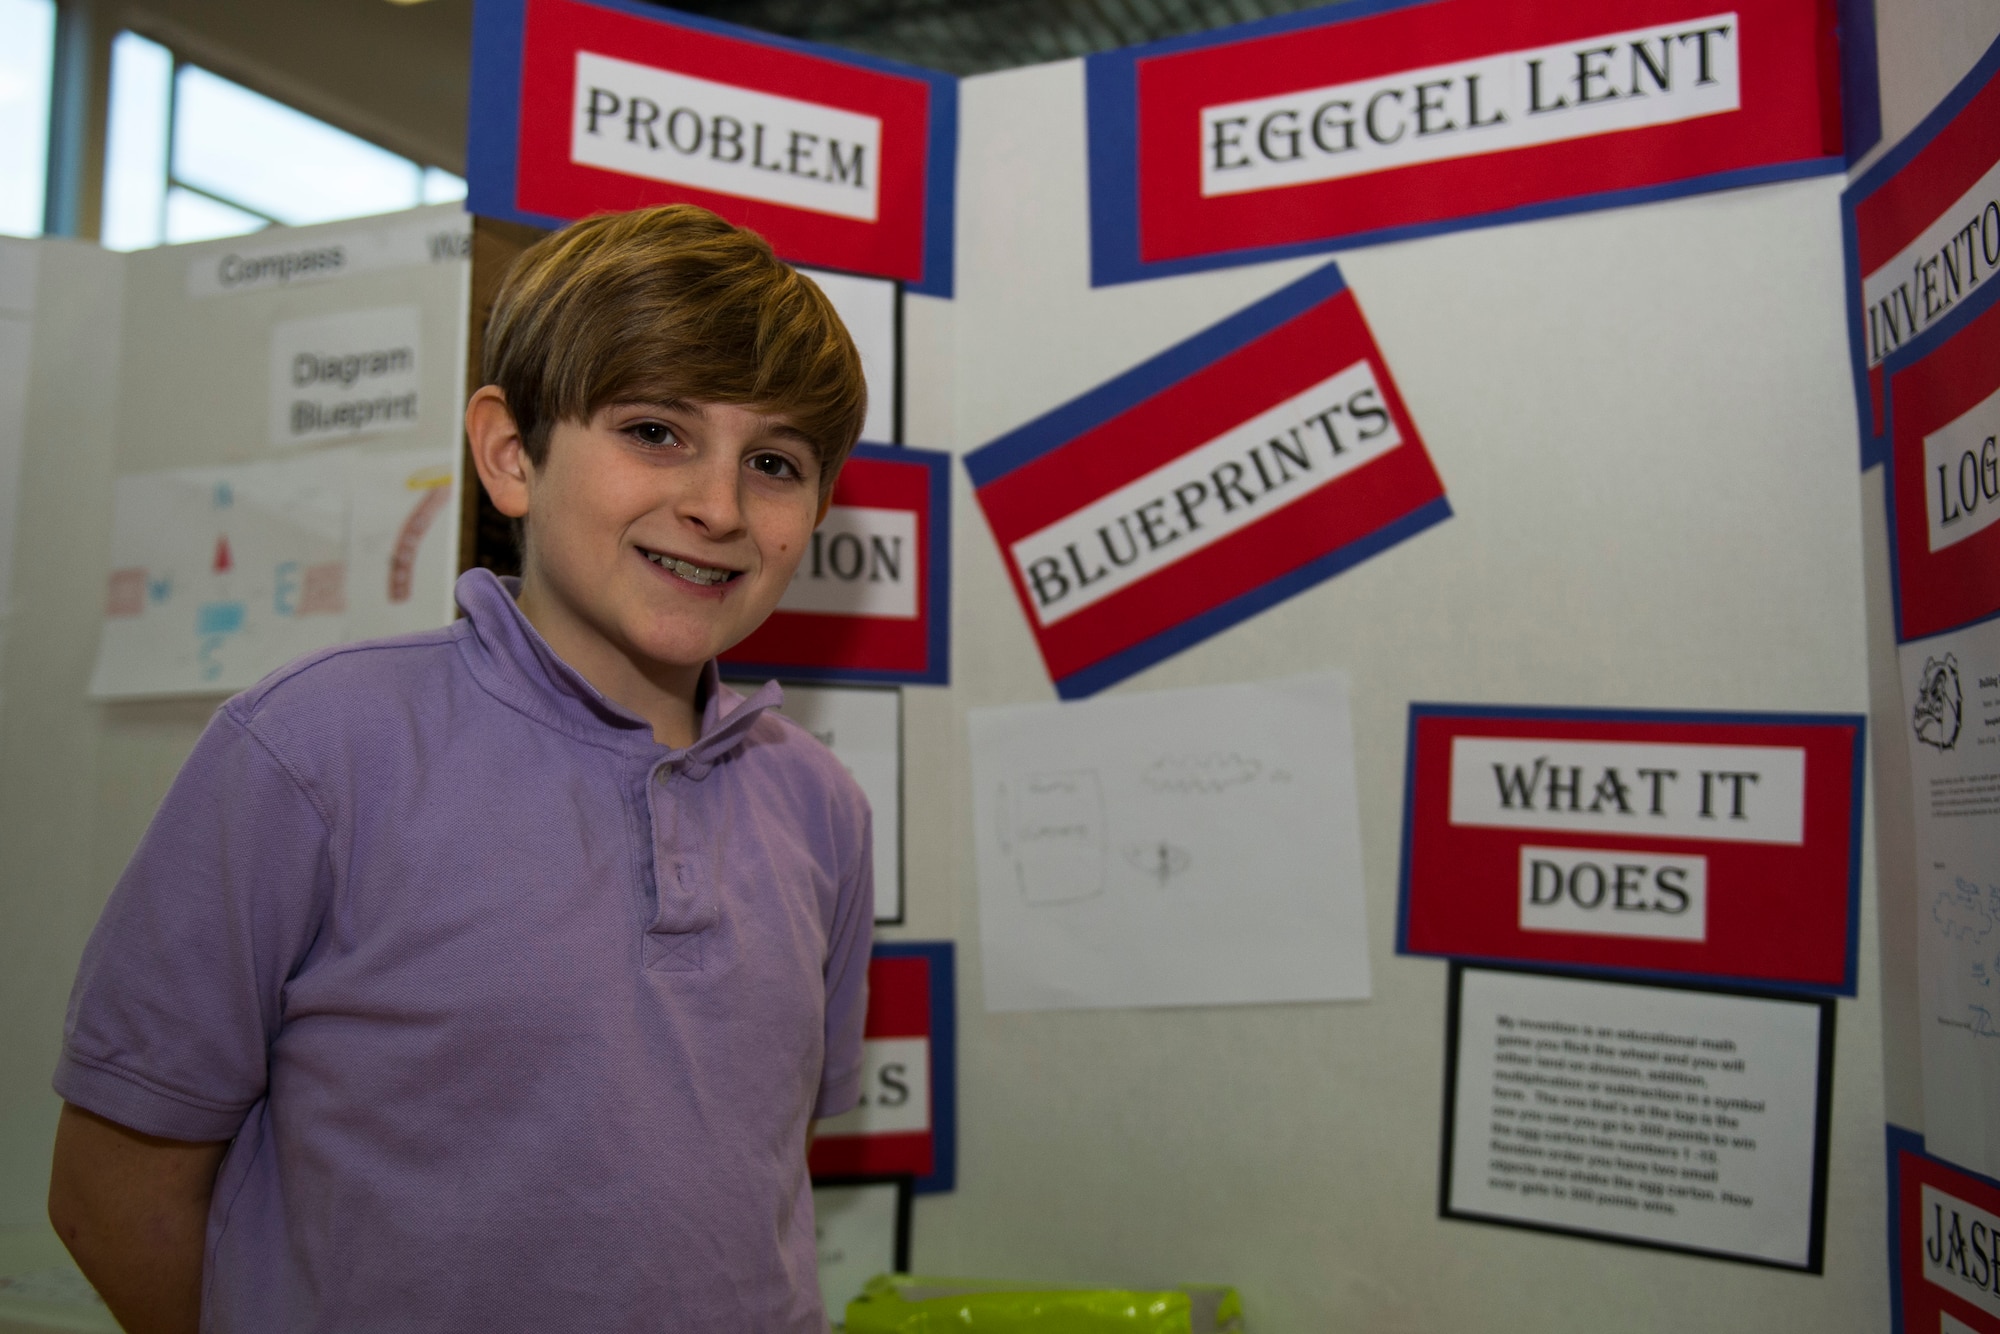 Jasper, a fifth grade student at Spangdahlem Middle High School, stands in front of his display board during the Invention Convention at Spangdahlem Air Base, Germany, Dec. 15, 2015. Jasper invented a game designed to enhance students’ math skills. (U.S. Air Force photo by Airman 1st Class Luke Kitterman/Released)